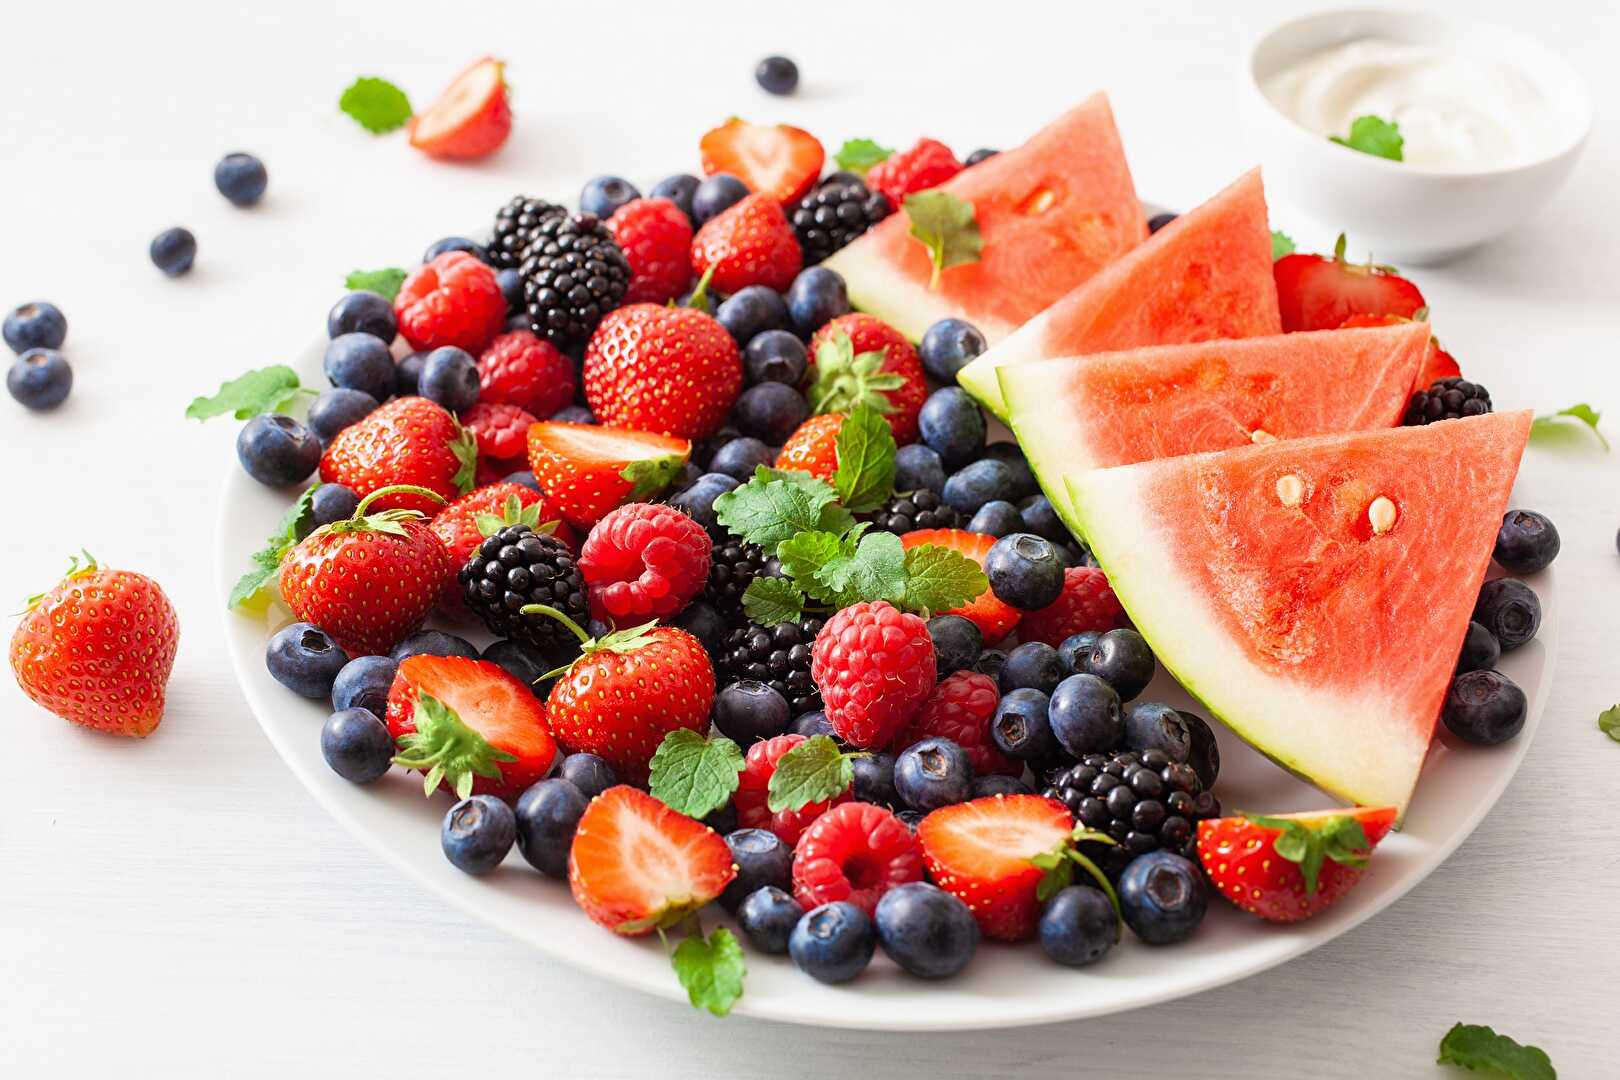 The 5 Least Caloric Fruits: Low in Calories, Rich in Nutrients